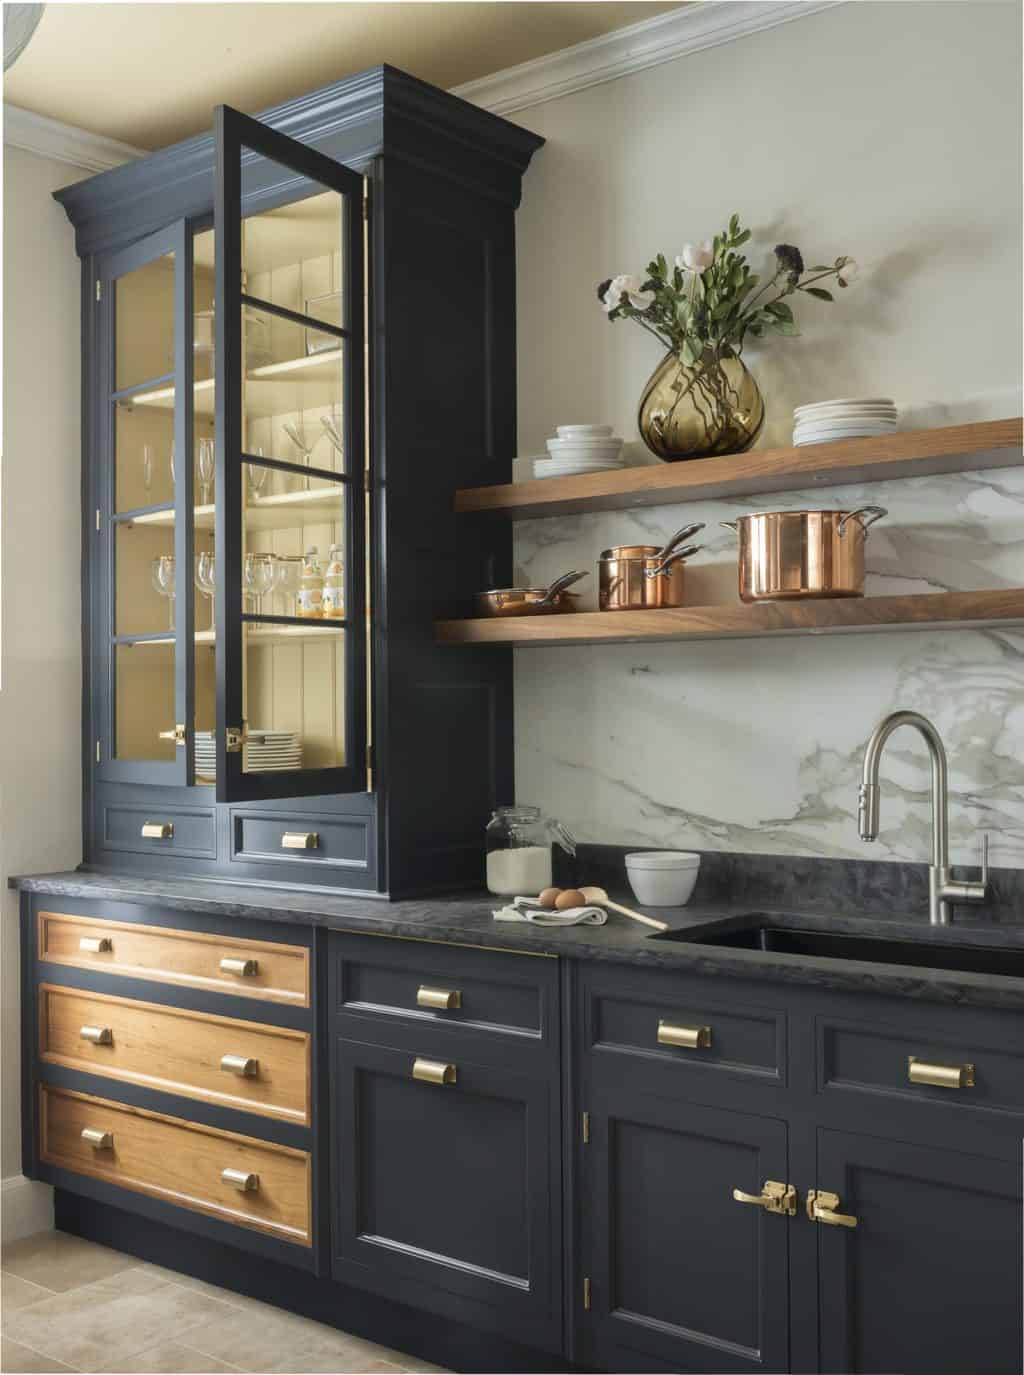 Gray Kitchen Cabinetry with Brass Knobs - Transitional - Kitchen